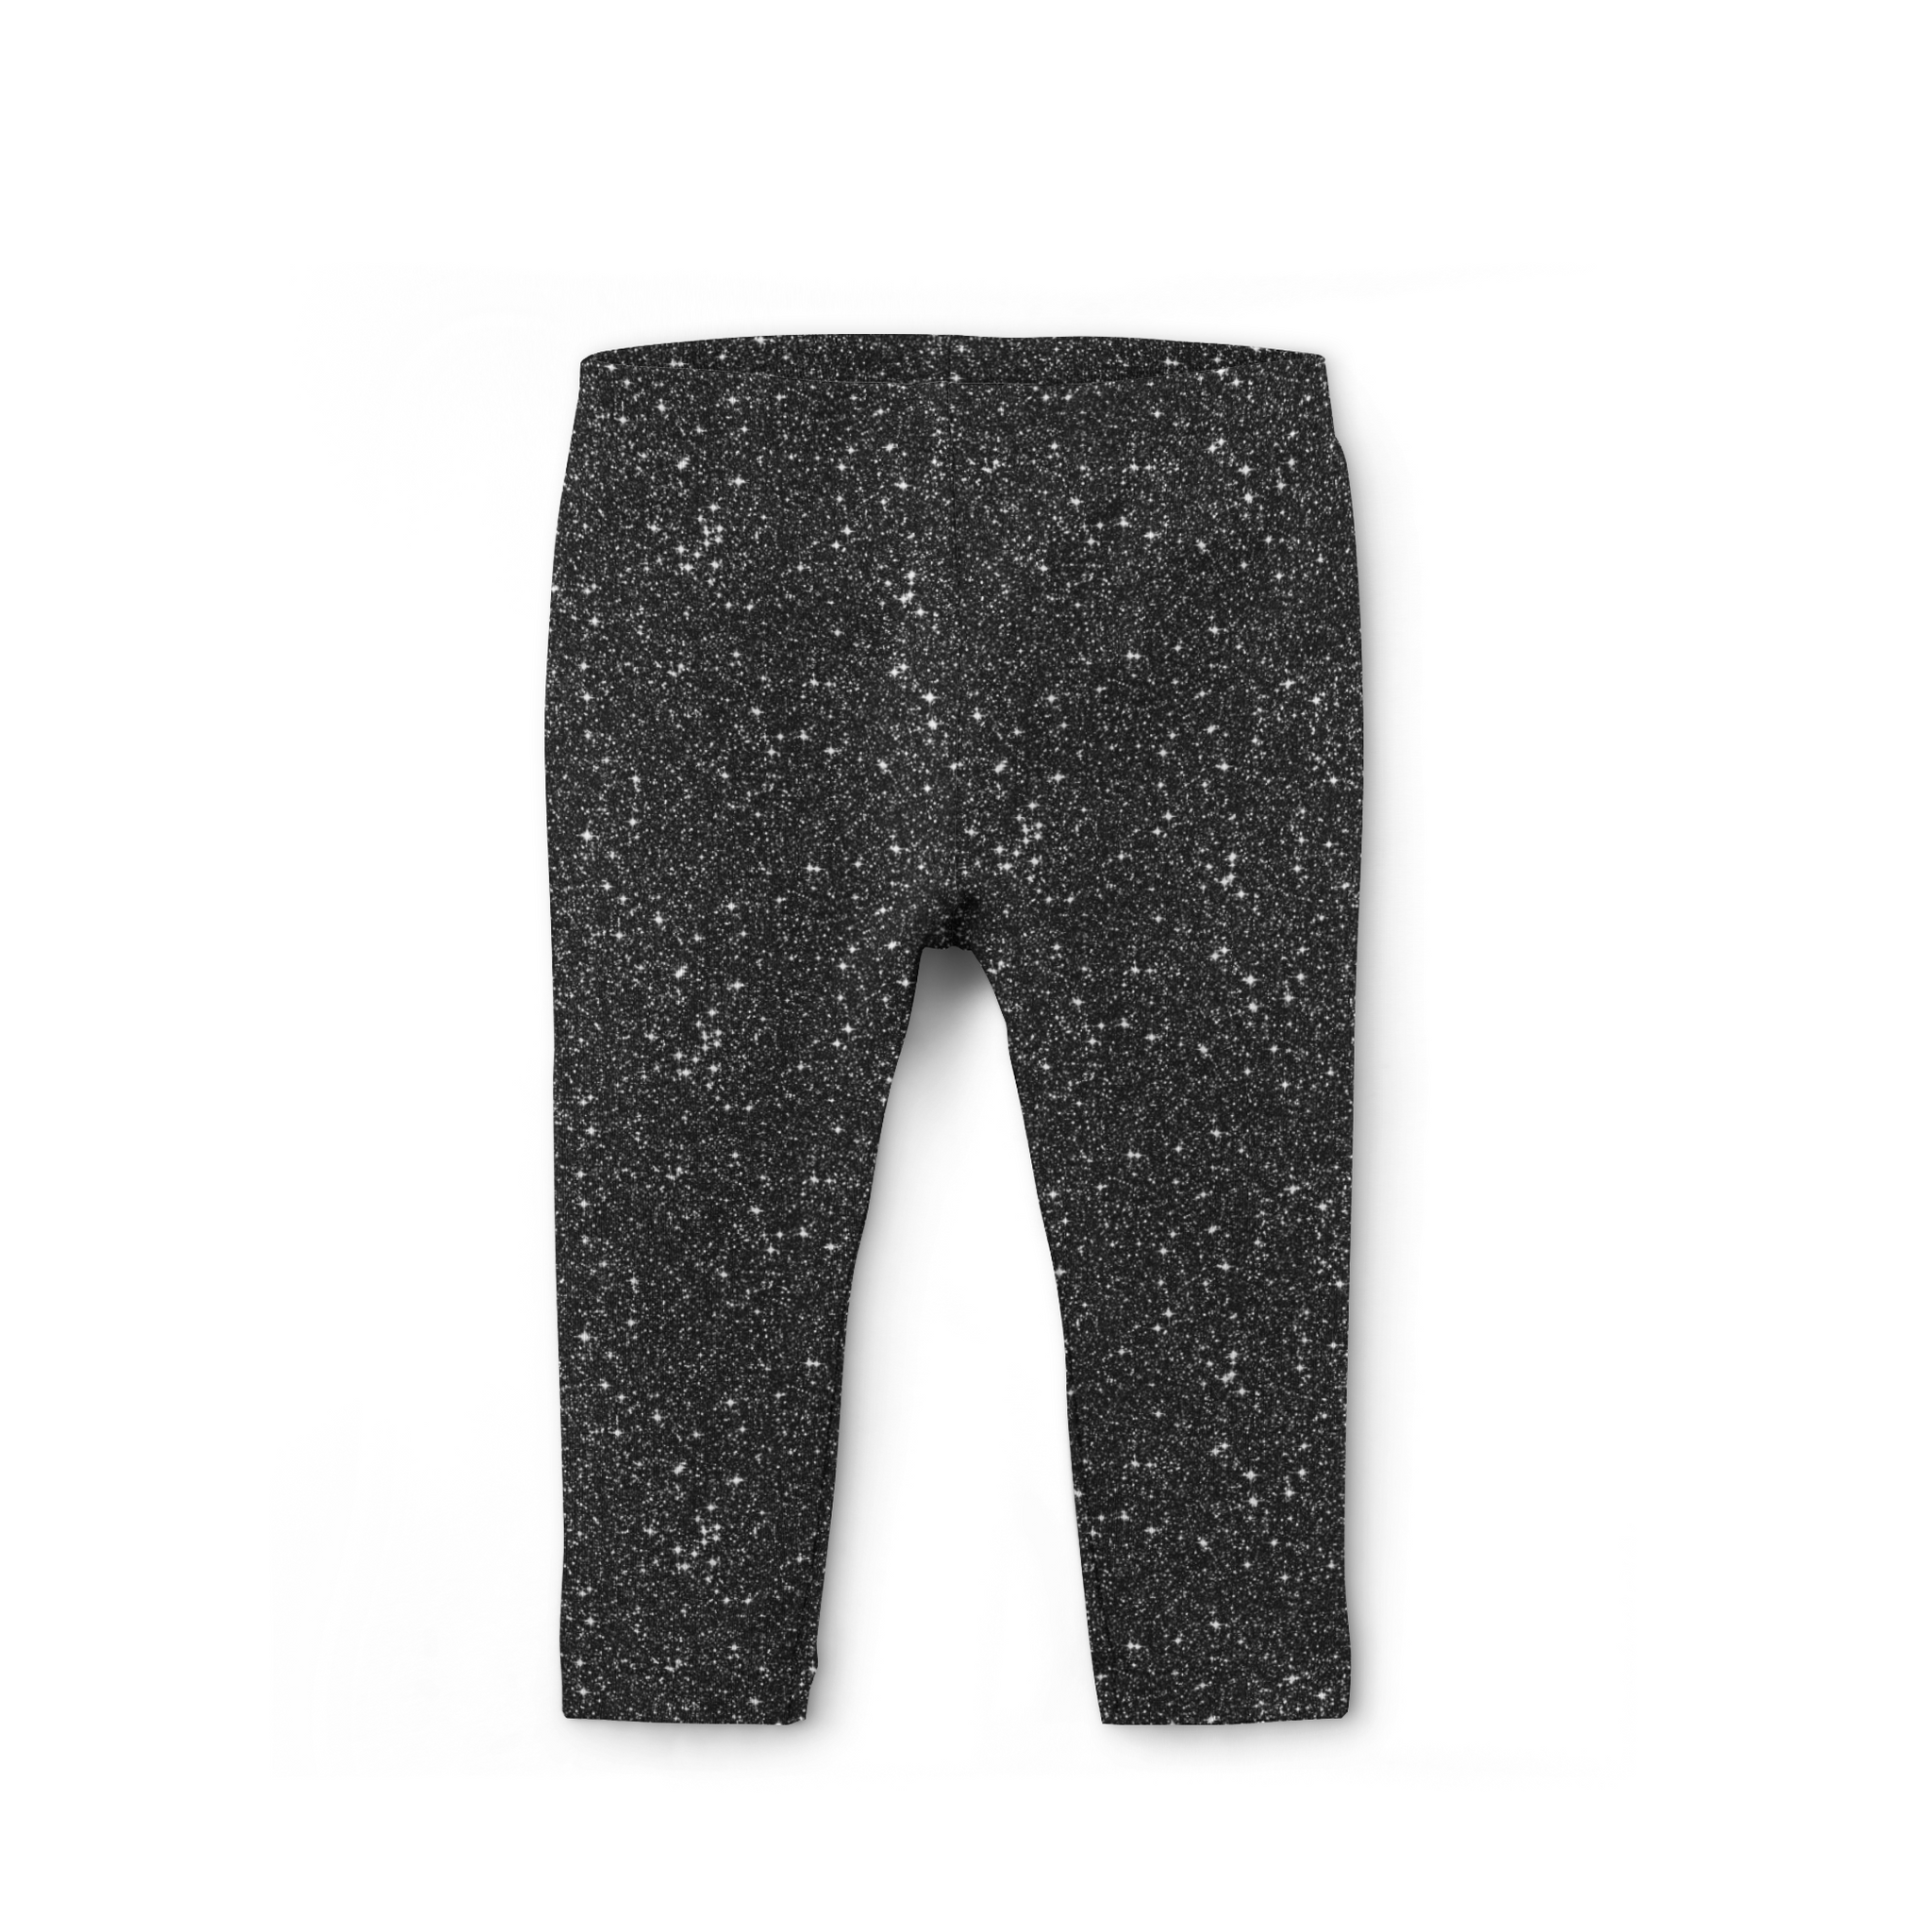 Fnochy Baby Girls Leggings Sparkly 3-14 Years Old Children's